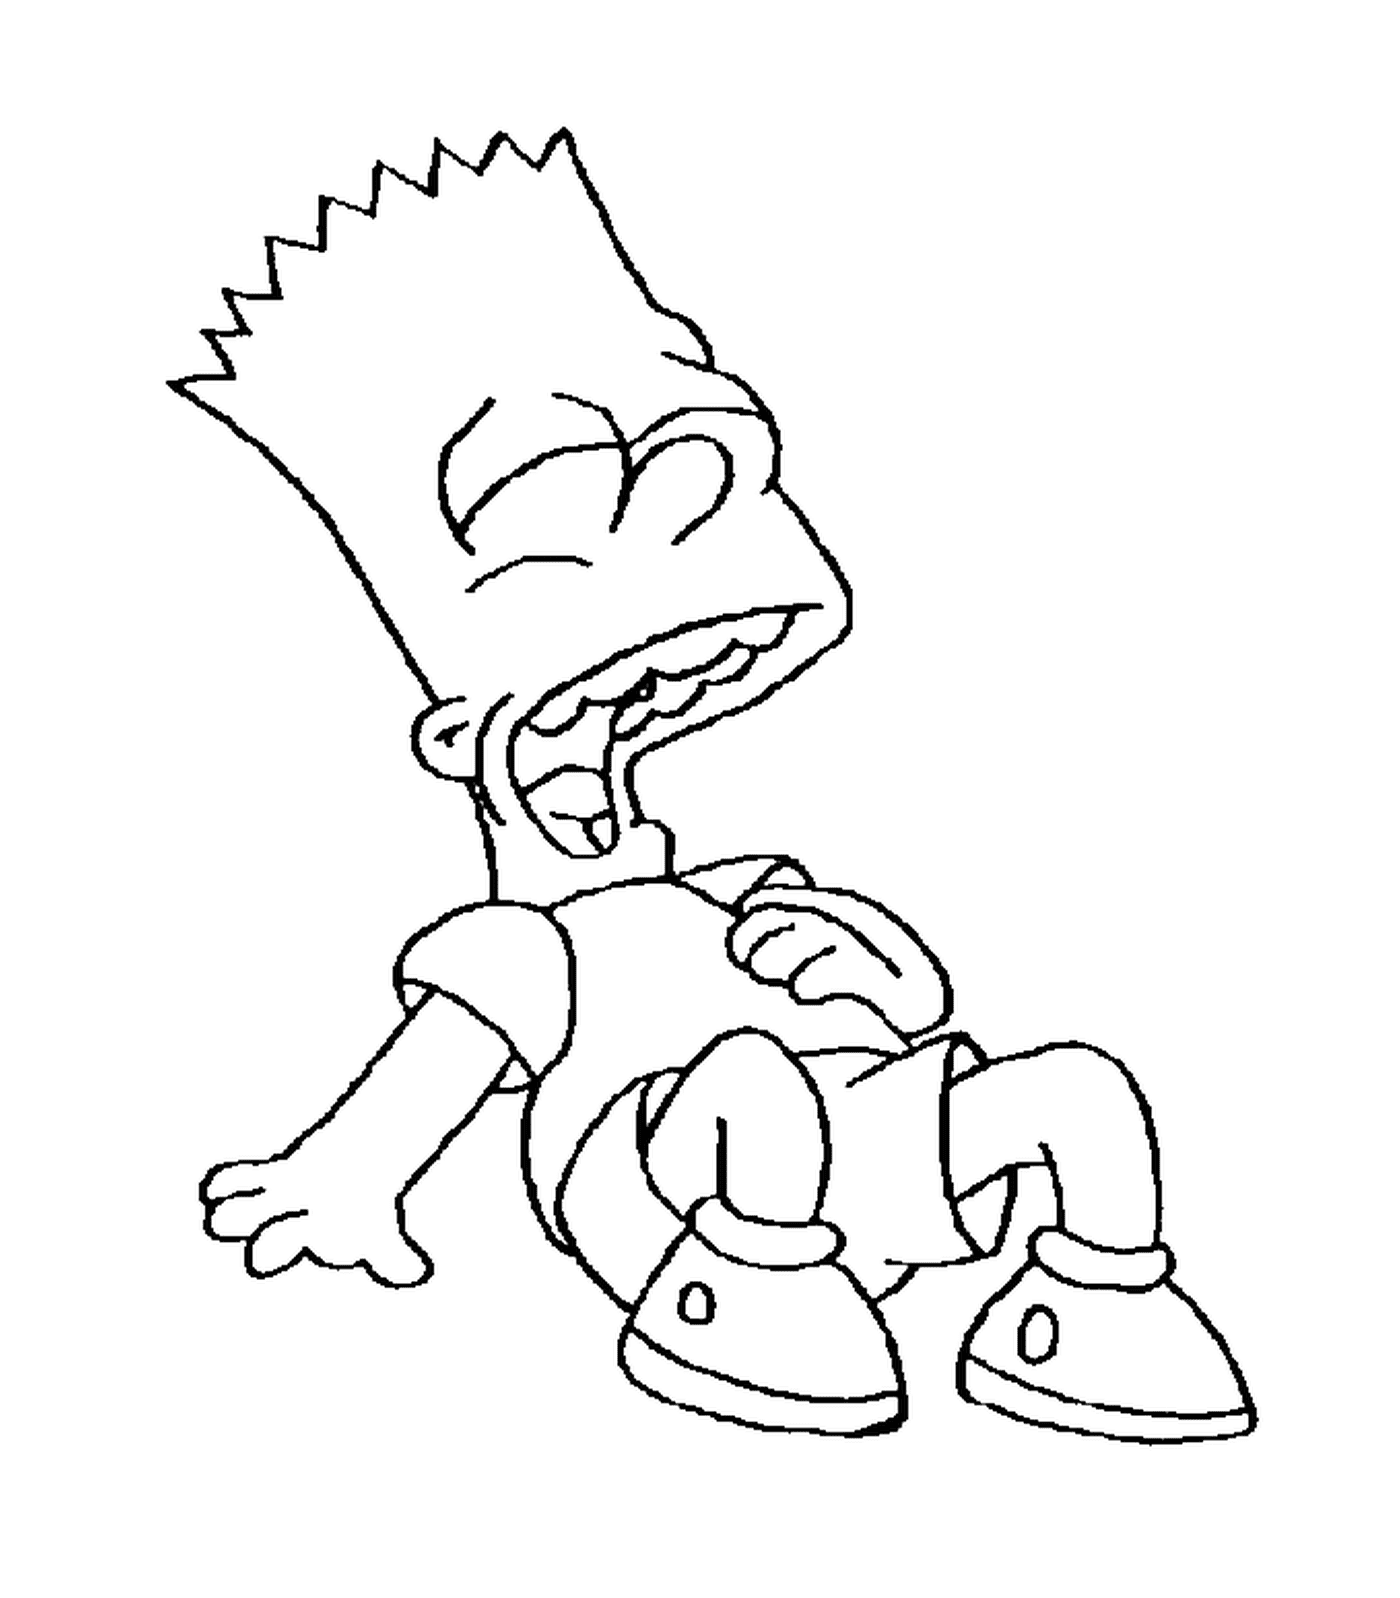  Bart laughs, cartoon character sitting on the floor 